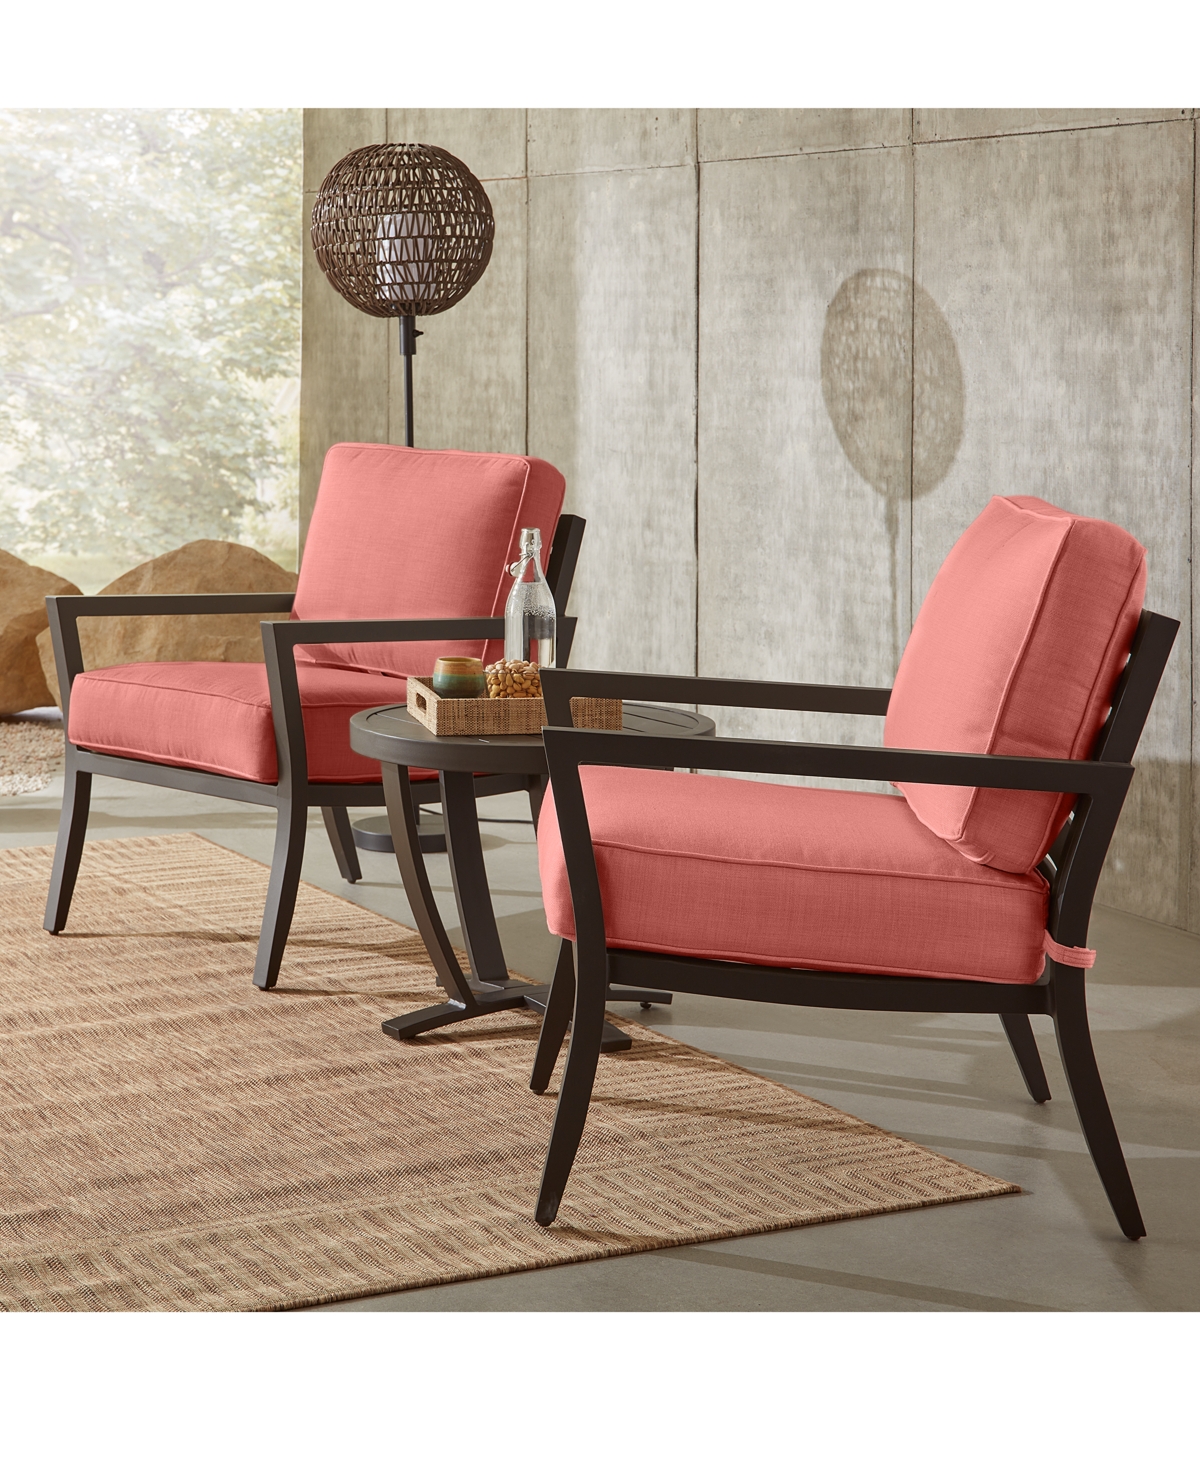 Shop Agio Astaire Outdoor 3-pc Lounge Chair Set (2 Lounge Chairs + 1 End Table) In Peony Brick Red